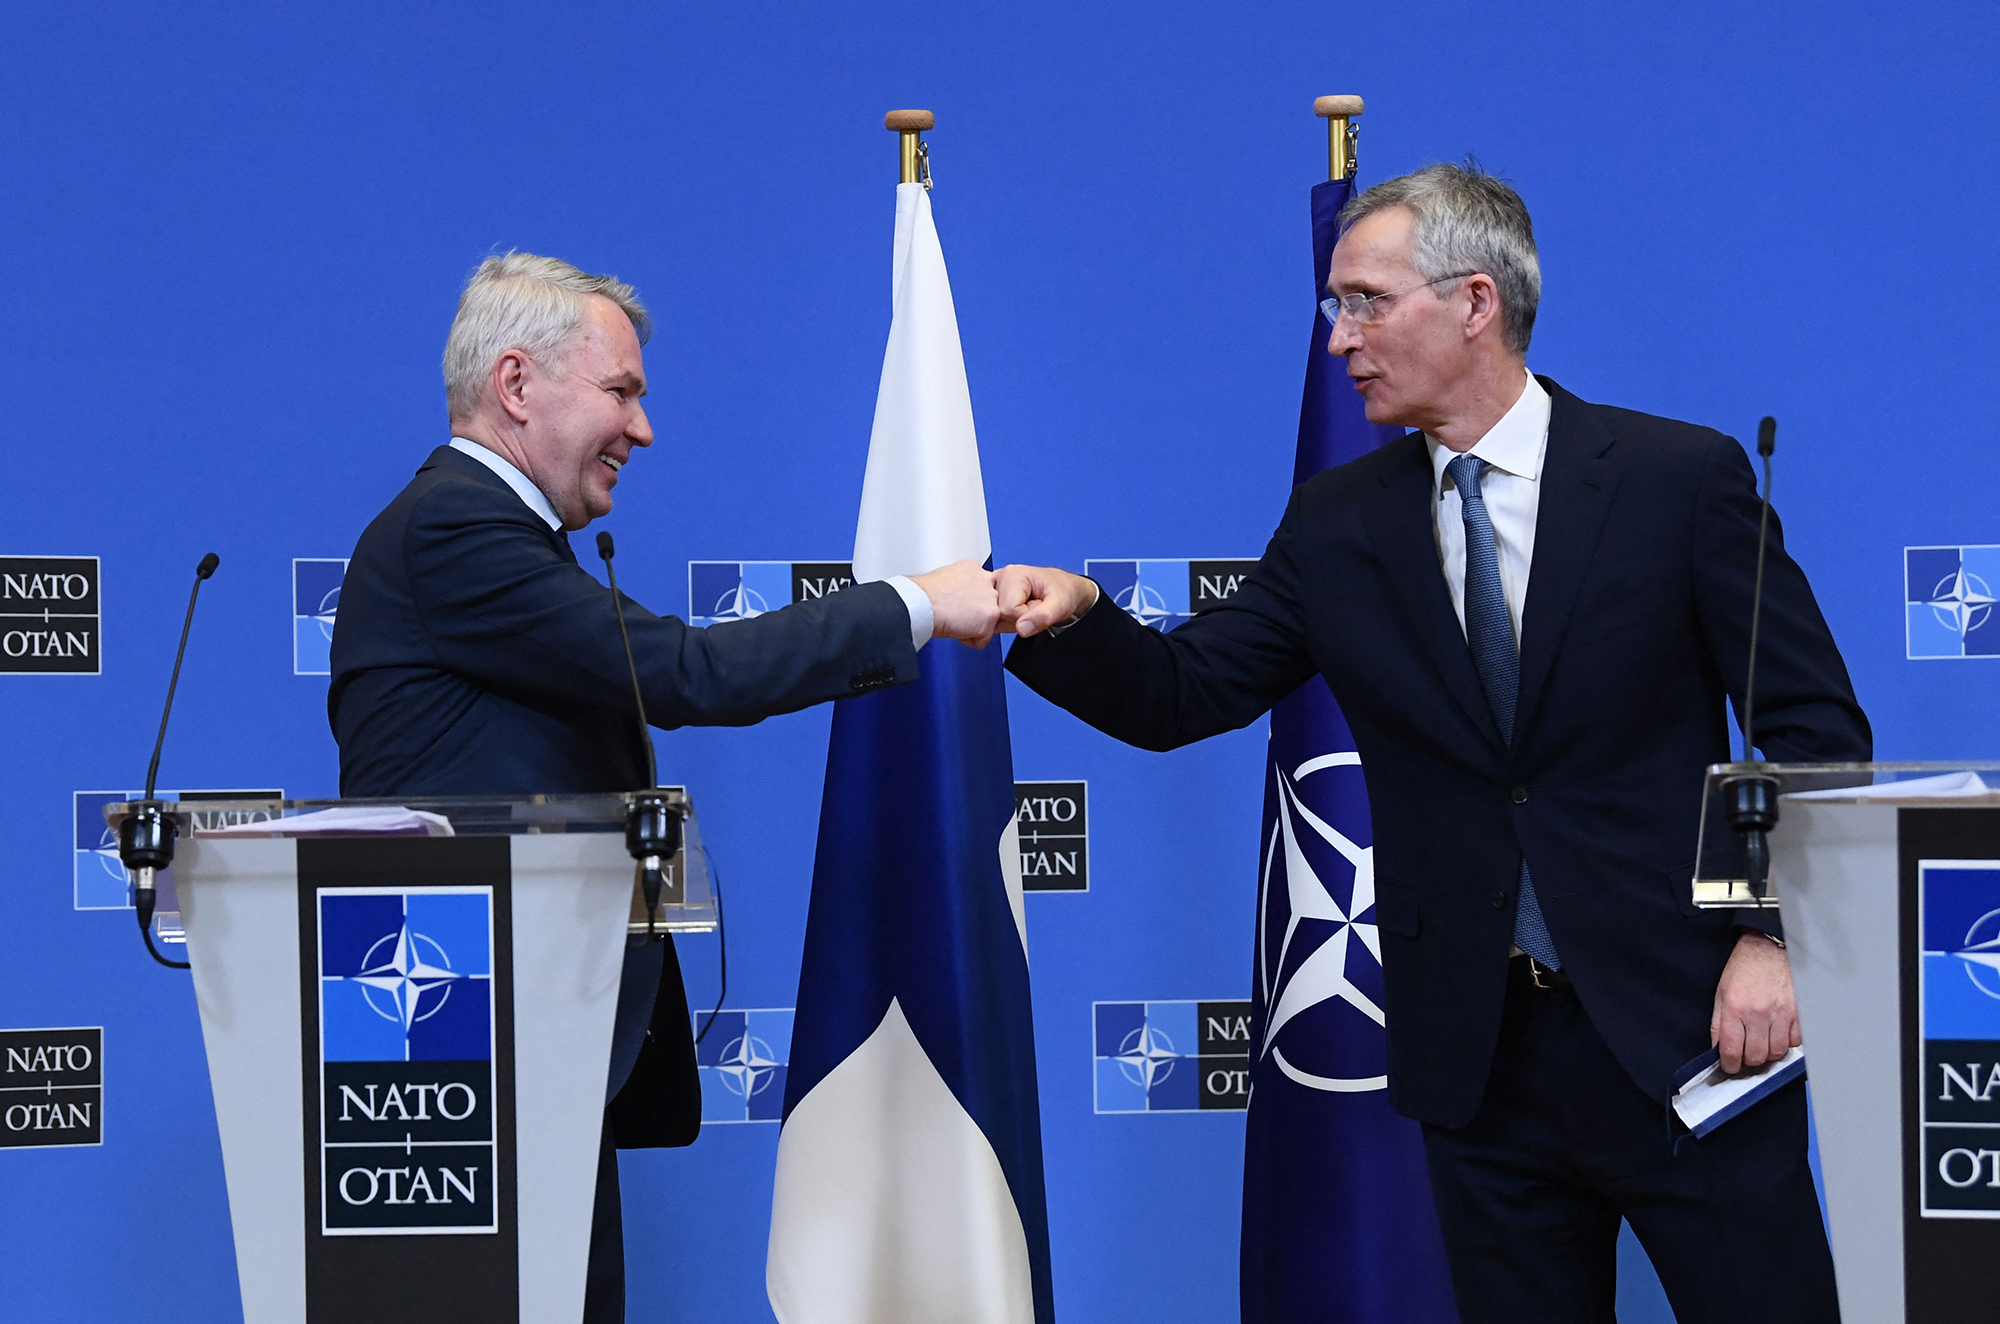 NATO Secretary General Jens Stoltenberg, right, and Finland Ministers for Foreign Affairs Pekka Haavisto bump fists after holding a joint press conference after their meeting at the Nato headquarters in Brussels, Belgium, on January 24, 2022.